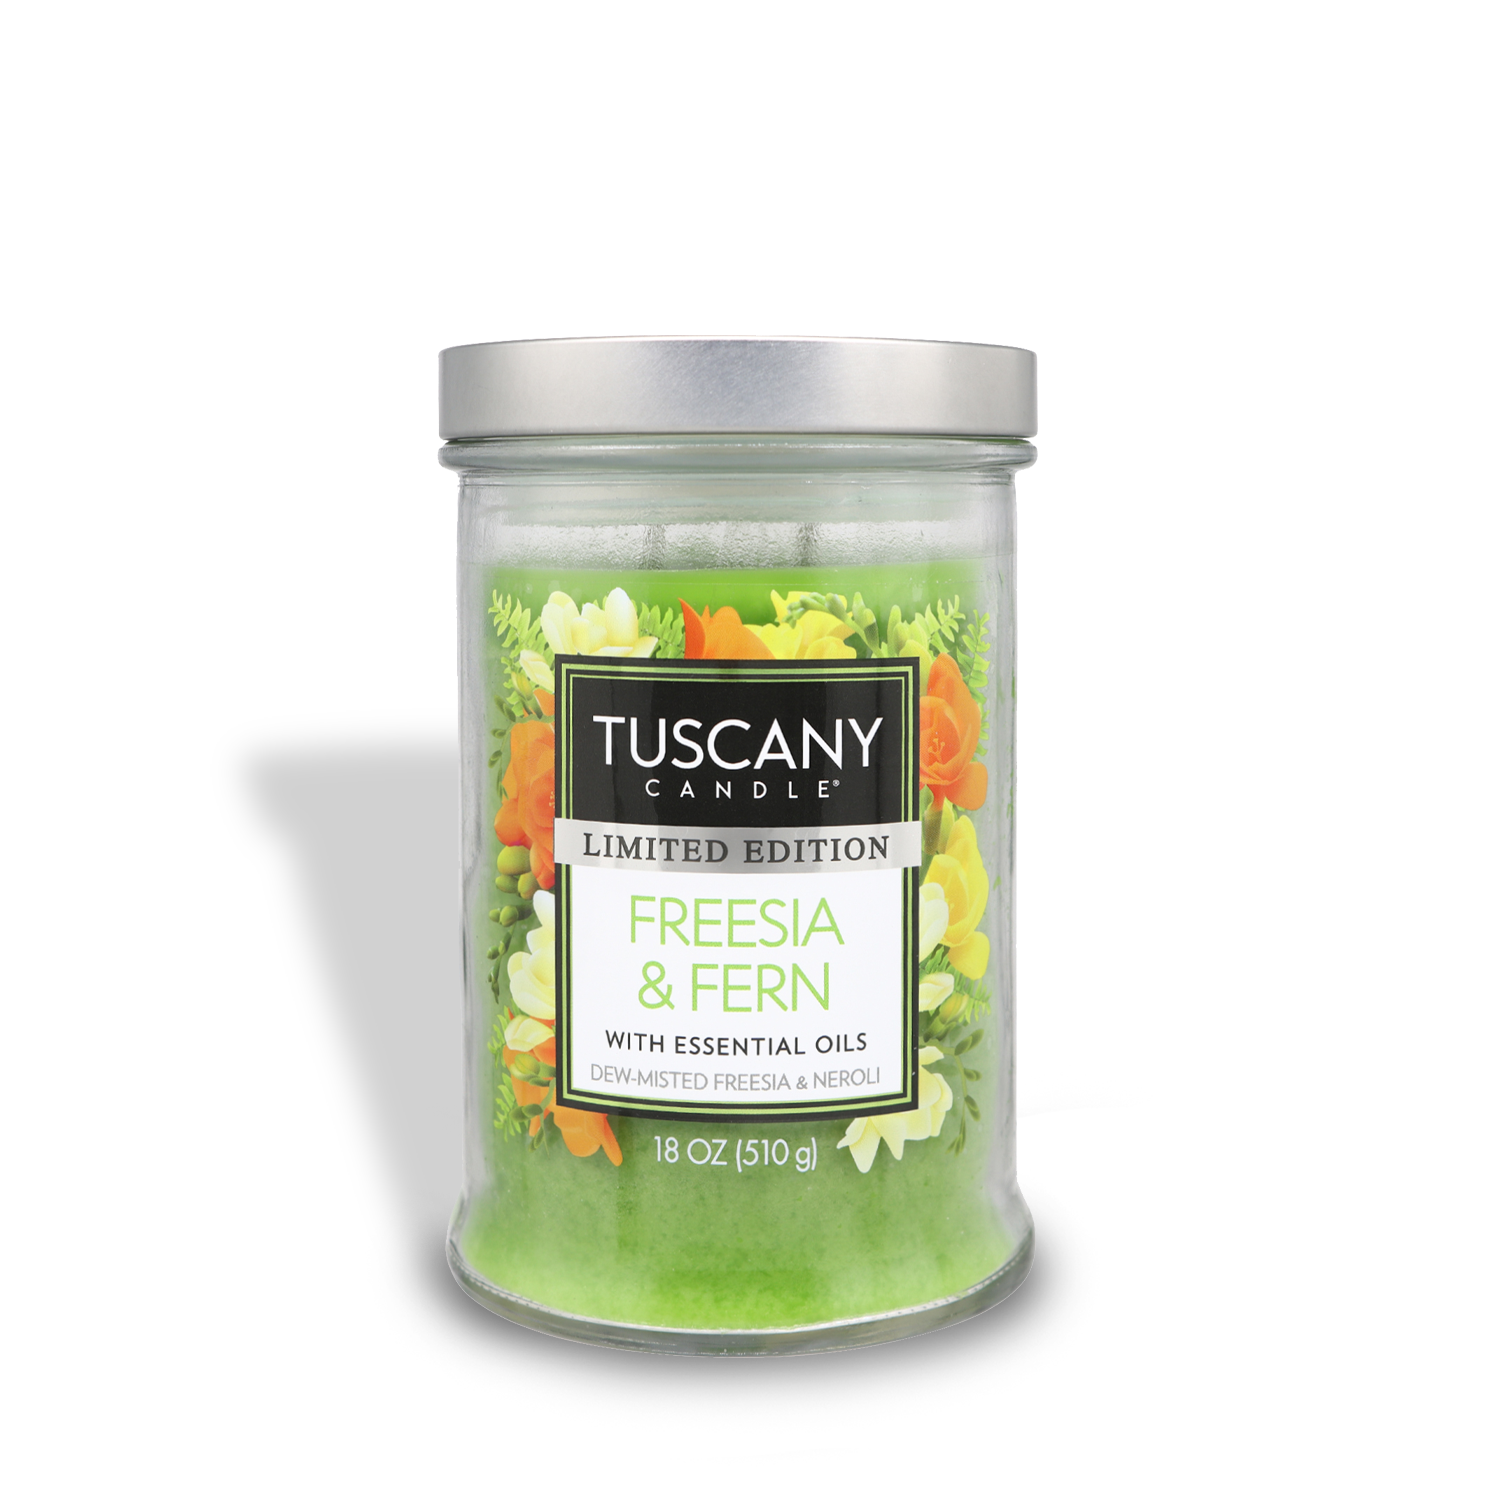 Freesia & Fern Long-Lasting Scented Jar Candle (18 oz) with floral notes by Tuscany Candle® SEASONAL.